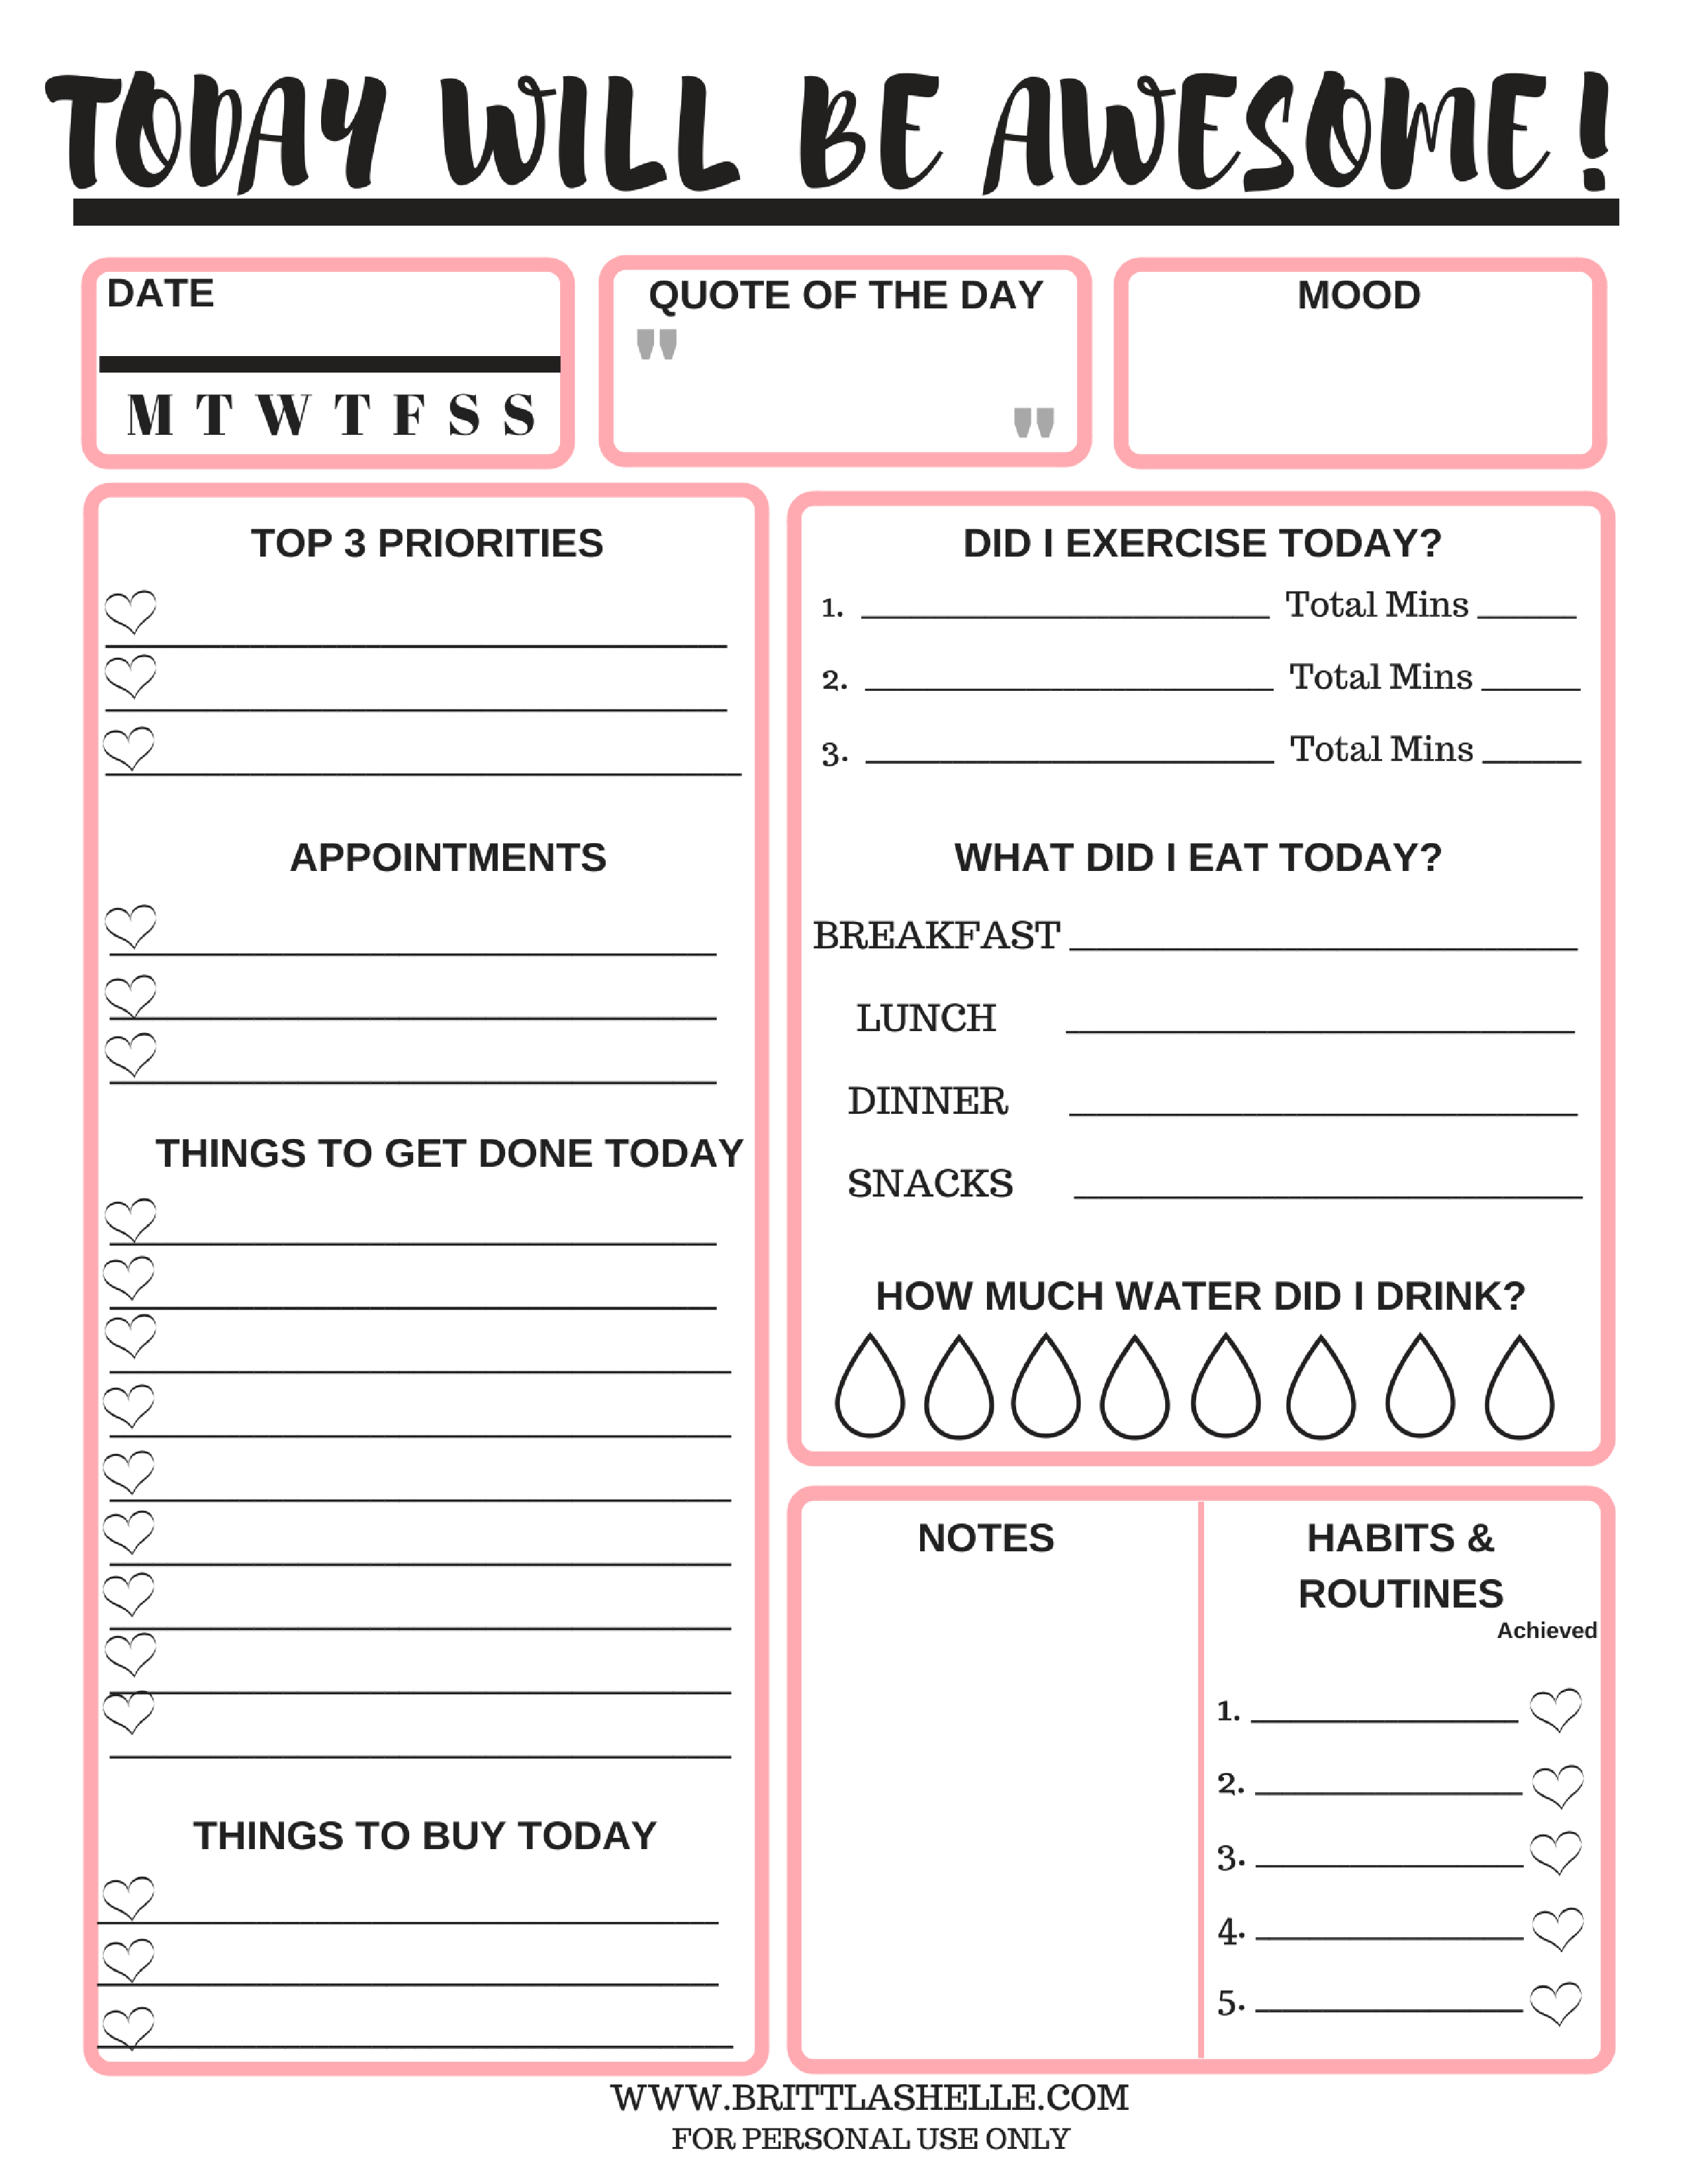 70 Effective Goal Setting Worksheets Kitty Baby Love